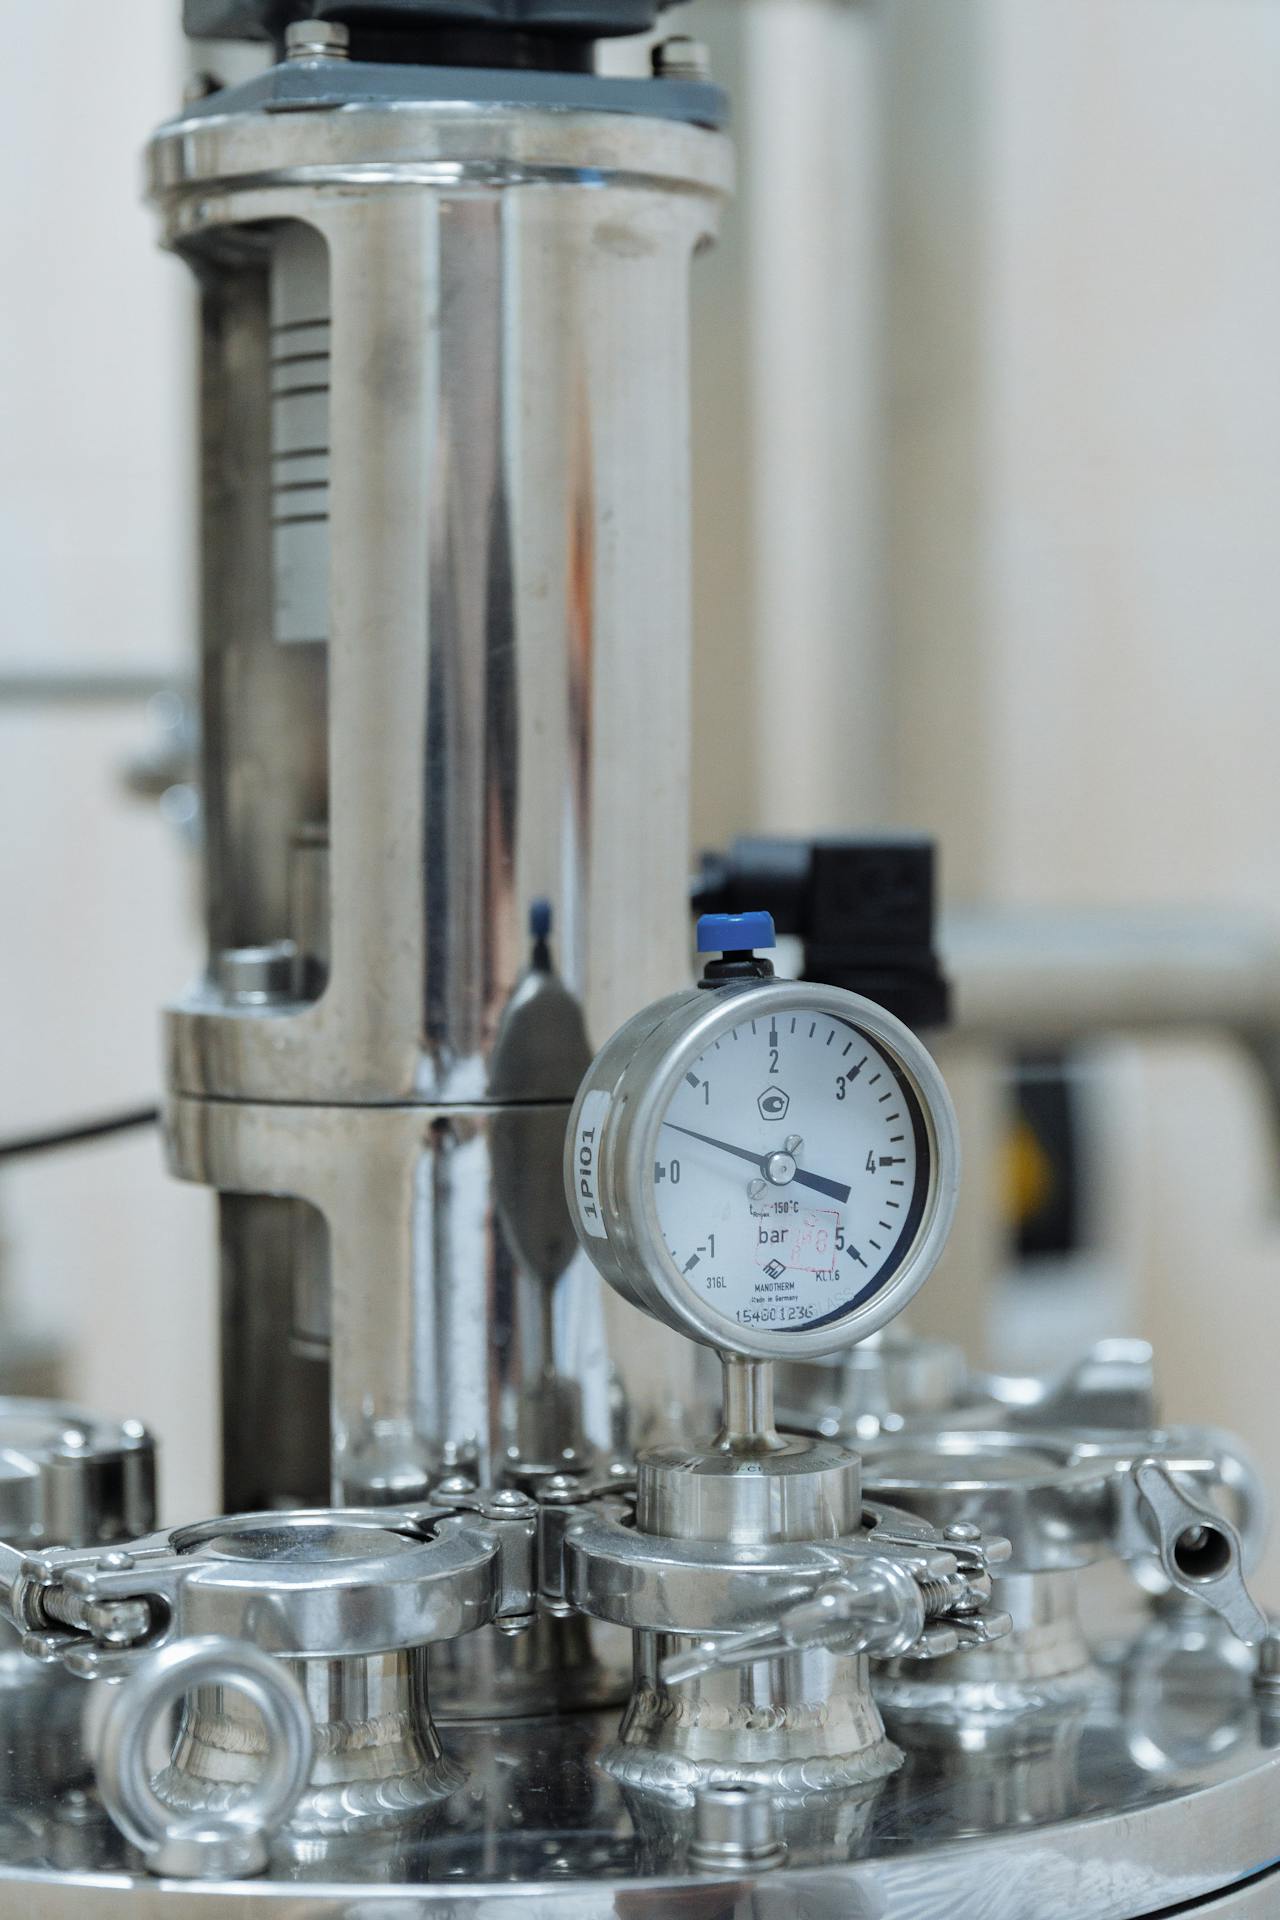 The Principles of Safety Valve Operation